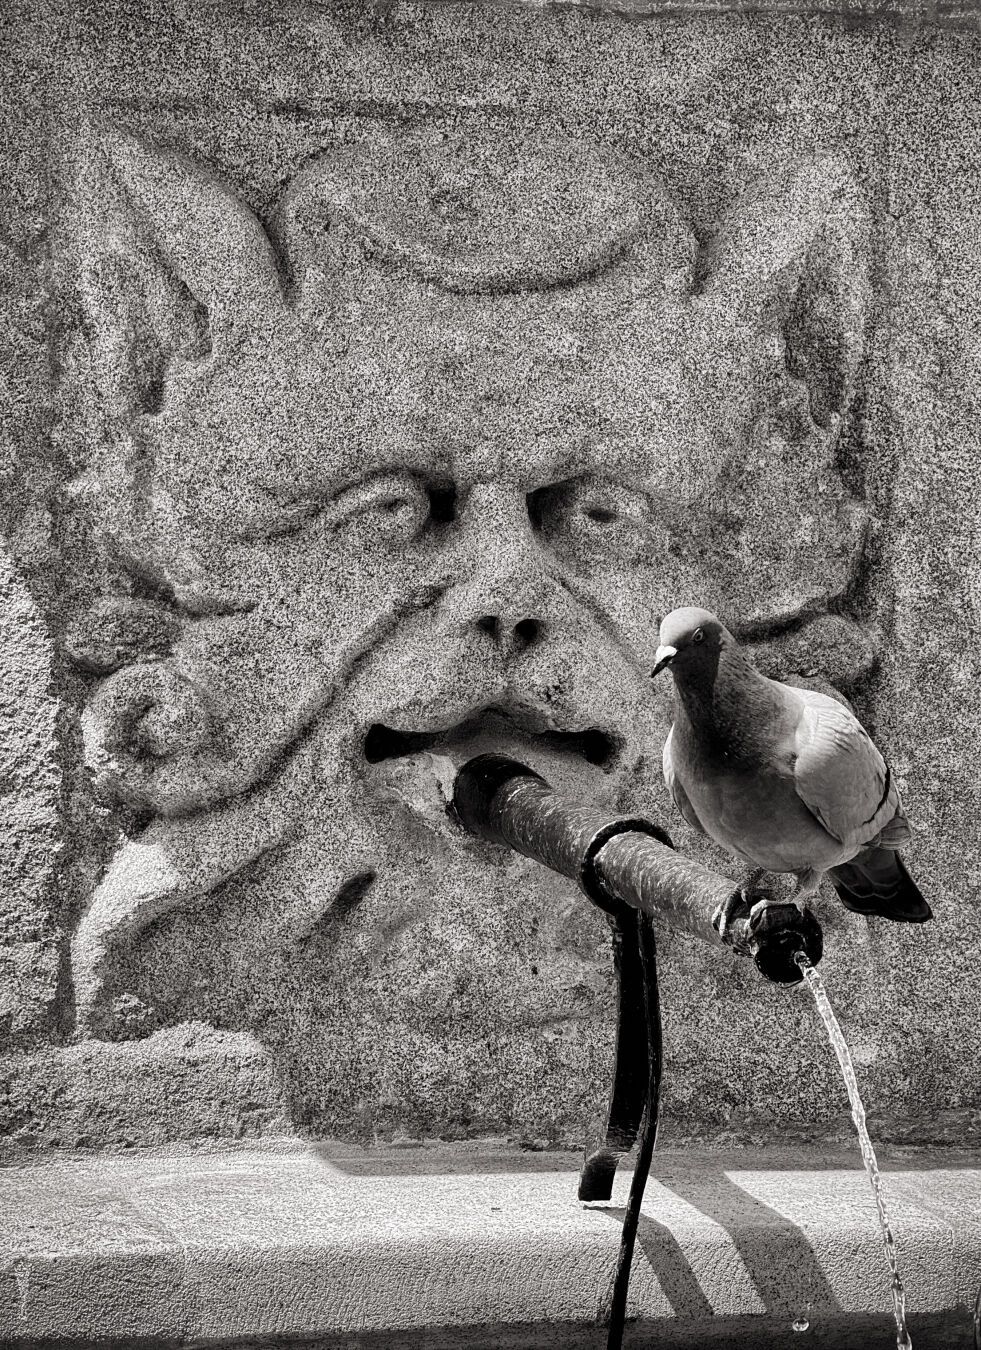 Don't steal my pipe

#fountain #pidgeon #blackandwhite  #photography